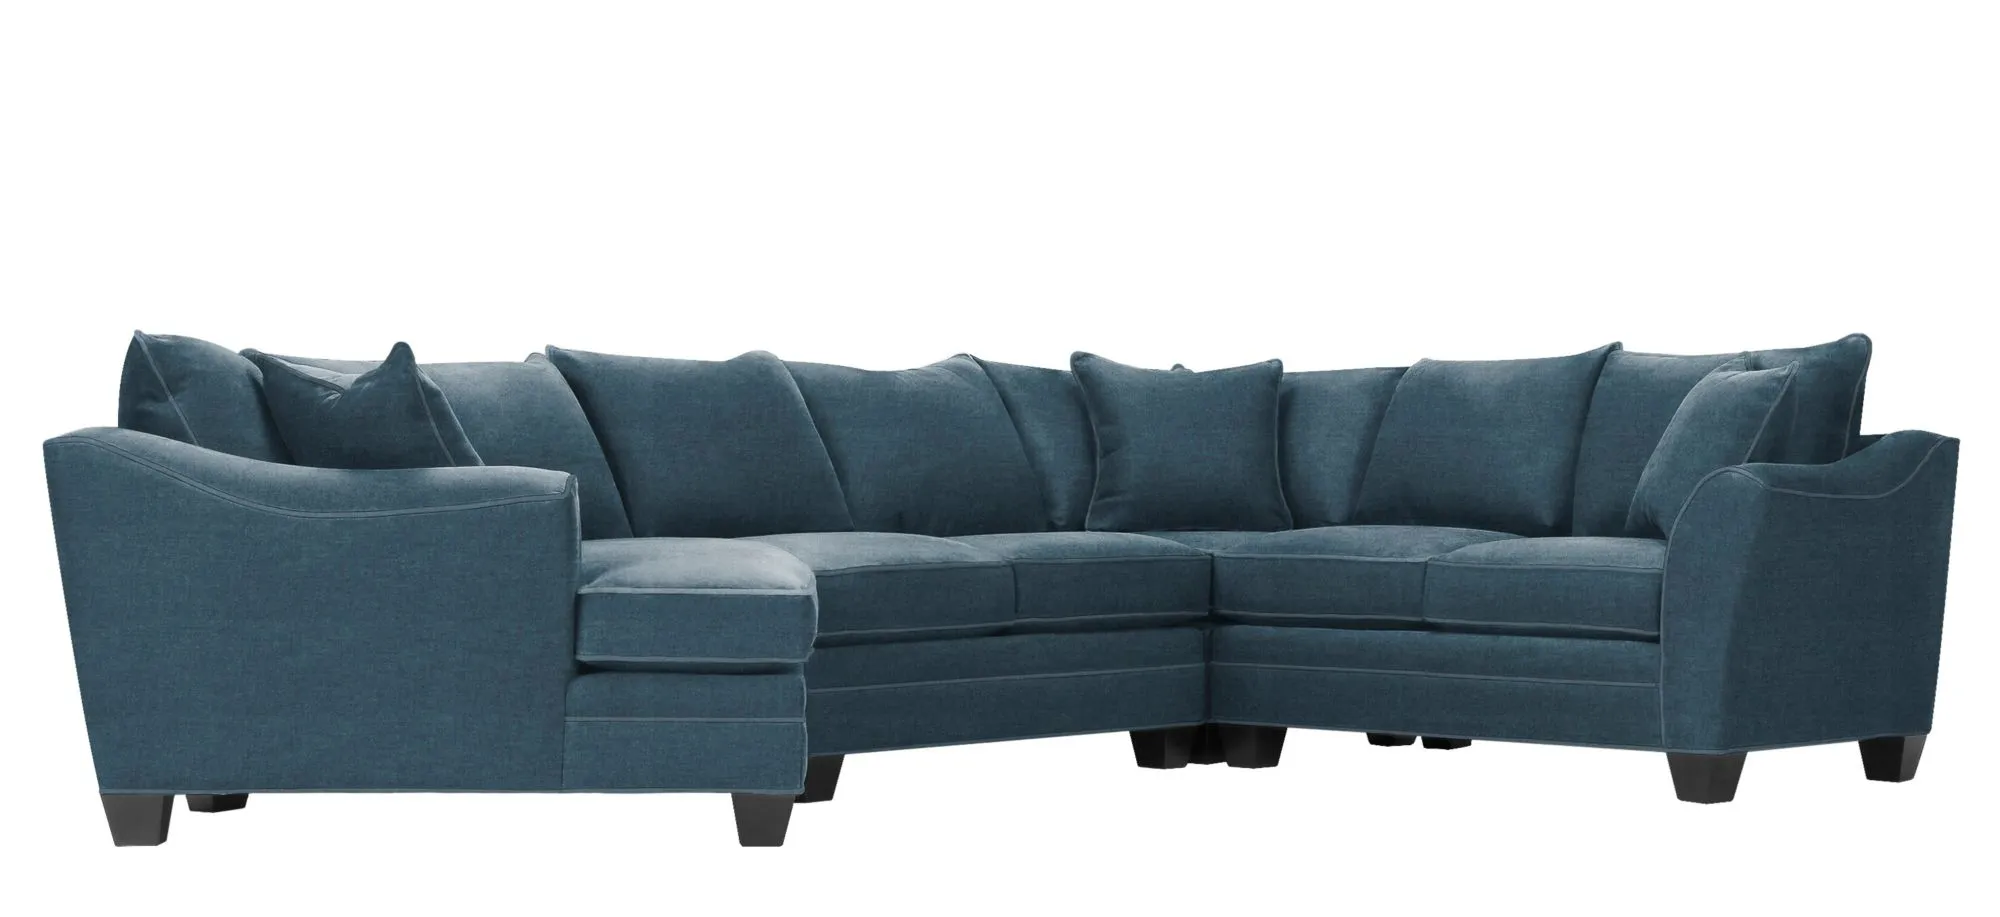 Foresthill 4-pc. Left Hand Cuddler with Loveseat Sectional Sofa in Santa Rosa Denim by H.M. Richards